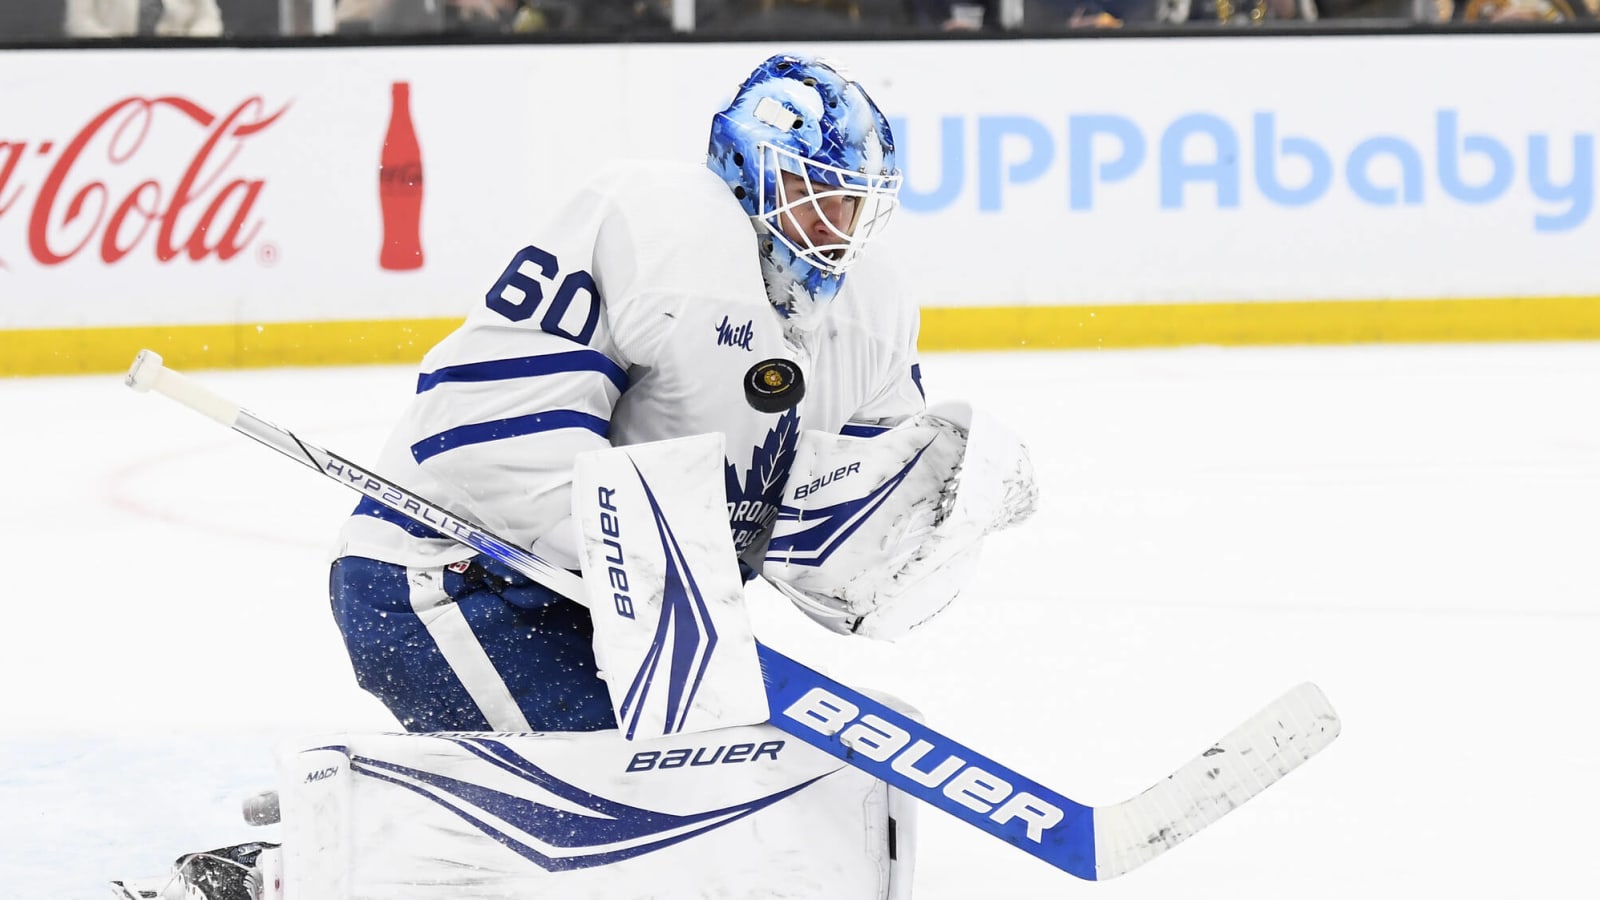 Maple Leafs’ Playoff Hopes Rest on St. Louisan Woll